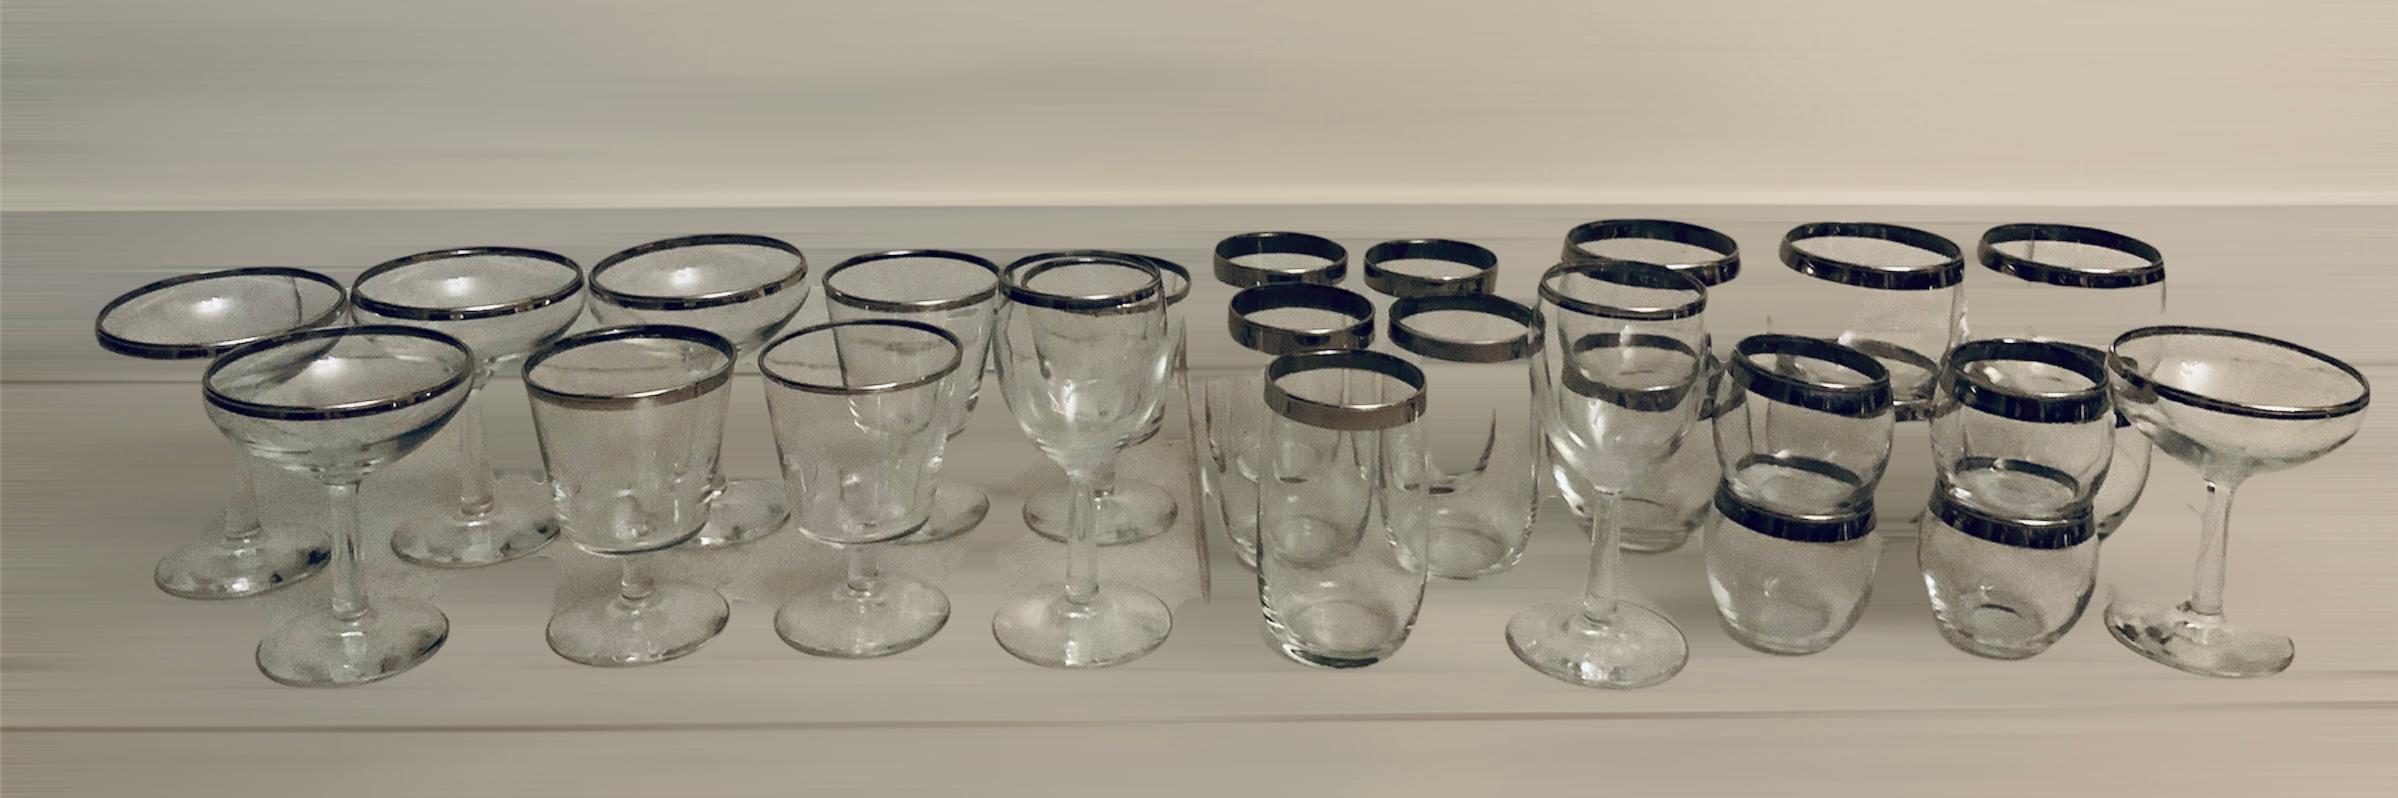 Set of Different Silver Rimmed Barware Clear Glasses 8